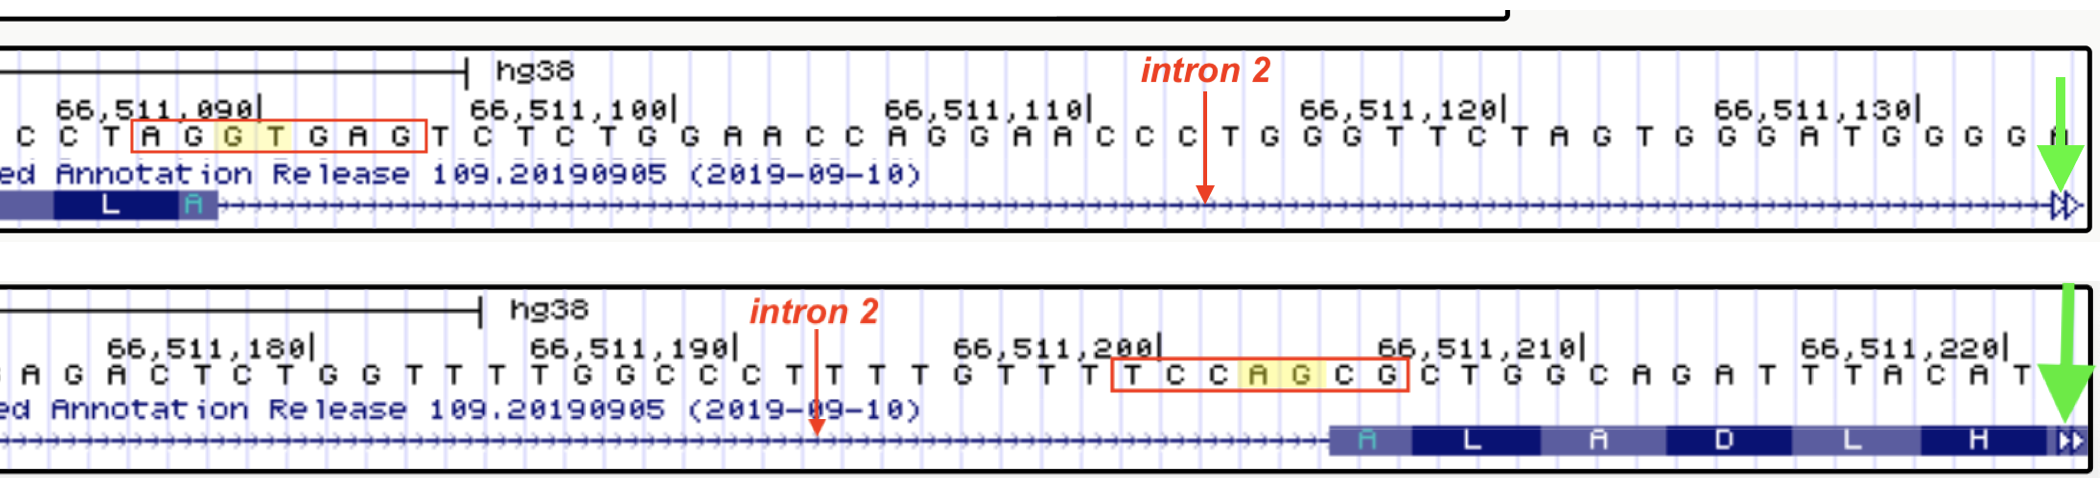 The exon-intron junctions of intron two are shown here. The sequences boxed in red outline the sequence that were input into row 2 of the table above. The top image includes the 5' end of intron 2. The bottom image includes the 3' end of intron 2. The 5' (top) and 3' (botom) splice sites are highlighted in yellow. To quickly jump to the next intron-exon junction, click on the open arrowhead on the far right (green arrows point to the open arrowheads). Another way to quickly view 5’ and 3’ splice site sequences is by clicking on the gene schematic in the NCBI Refseq track and then by clicking on the 'View details of parts of alignment within browser window' link.